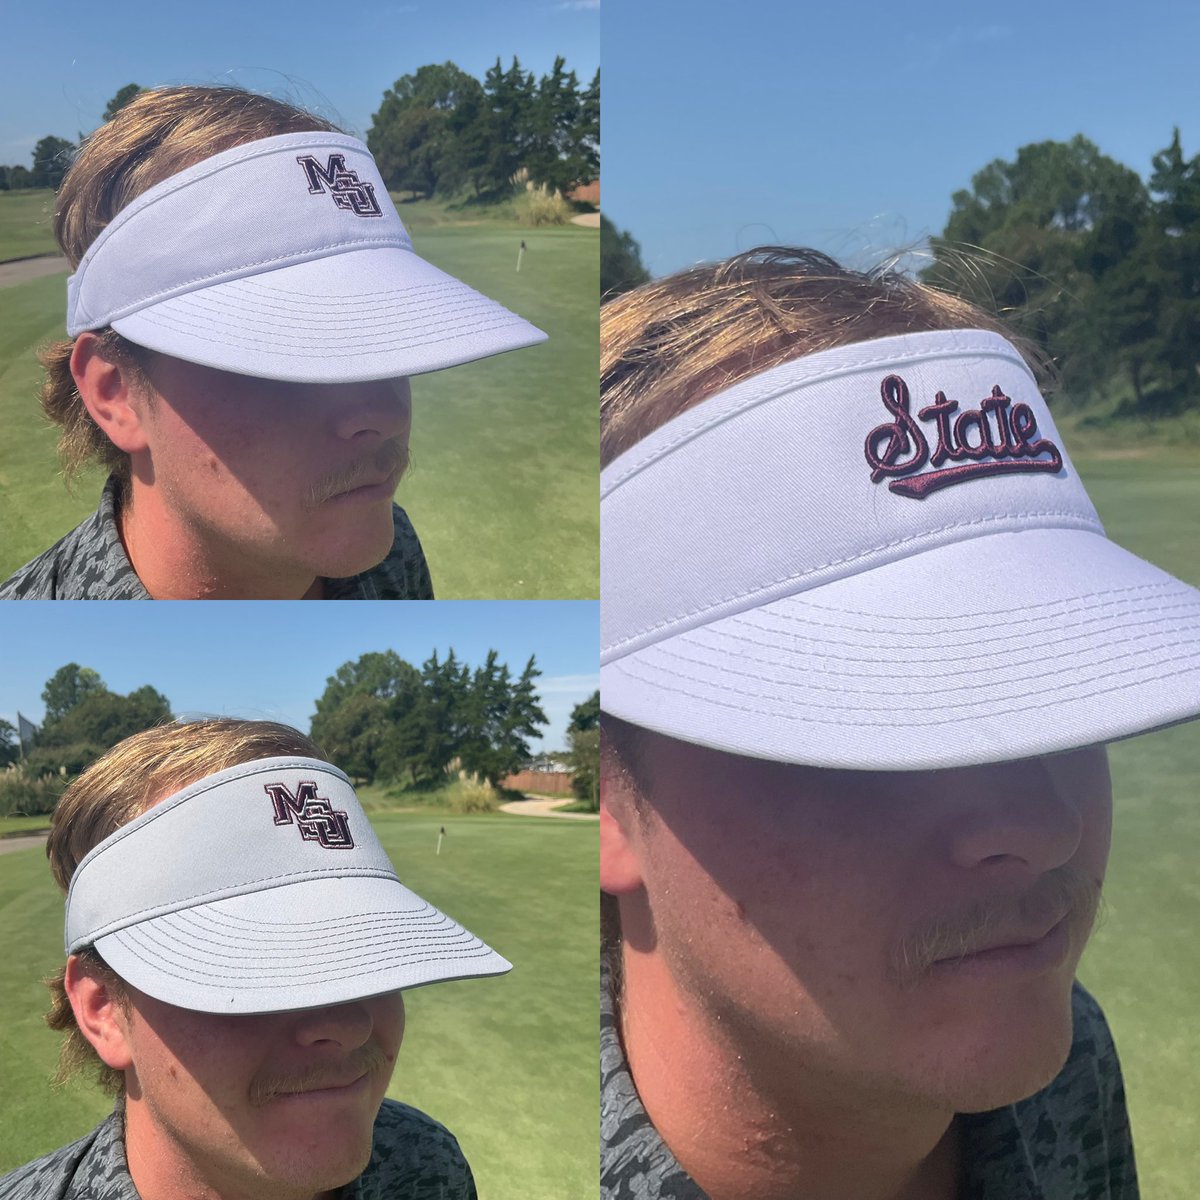 New Interlocking MSU hats and visors from @aheadusa available in-store and online! 

Golfshop.msstate.edu